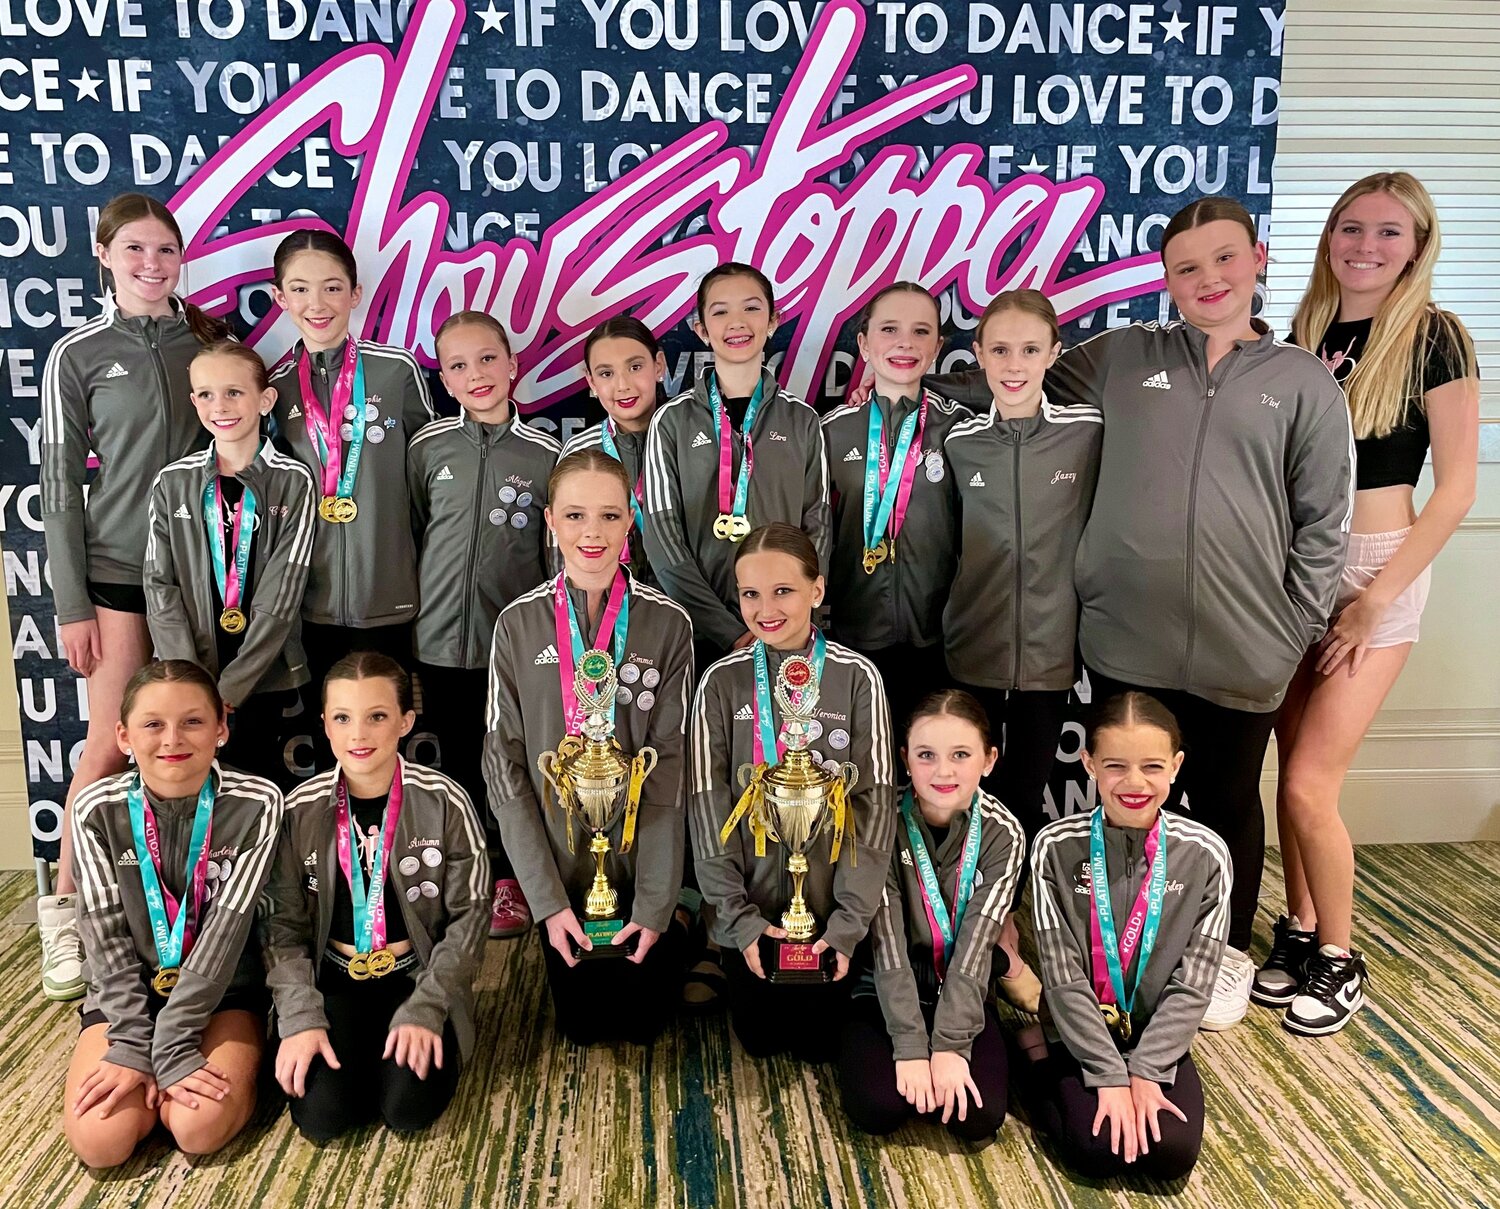 Fifth and Sixth Place Overall Junior Large Group winners in the Showstoppers competition in Orlando are pictured. Front row: Charleigh, Autumn, Emma, Veronica, Scarlett and Julep; back row: Madison Hughes, Chantilly, Sophie, Abigail, Tori, Lara, Sadie, Jazzy, Vivian and Reilly Hughes.